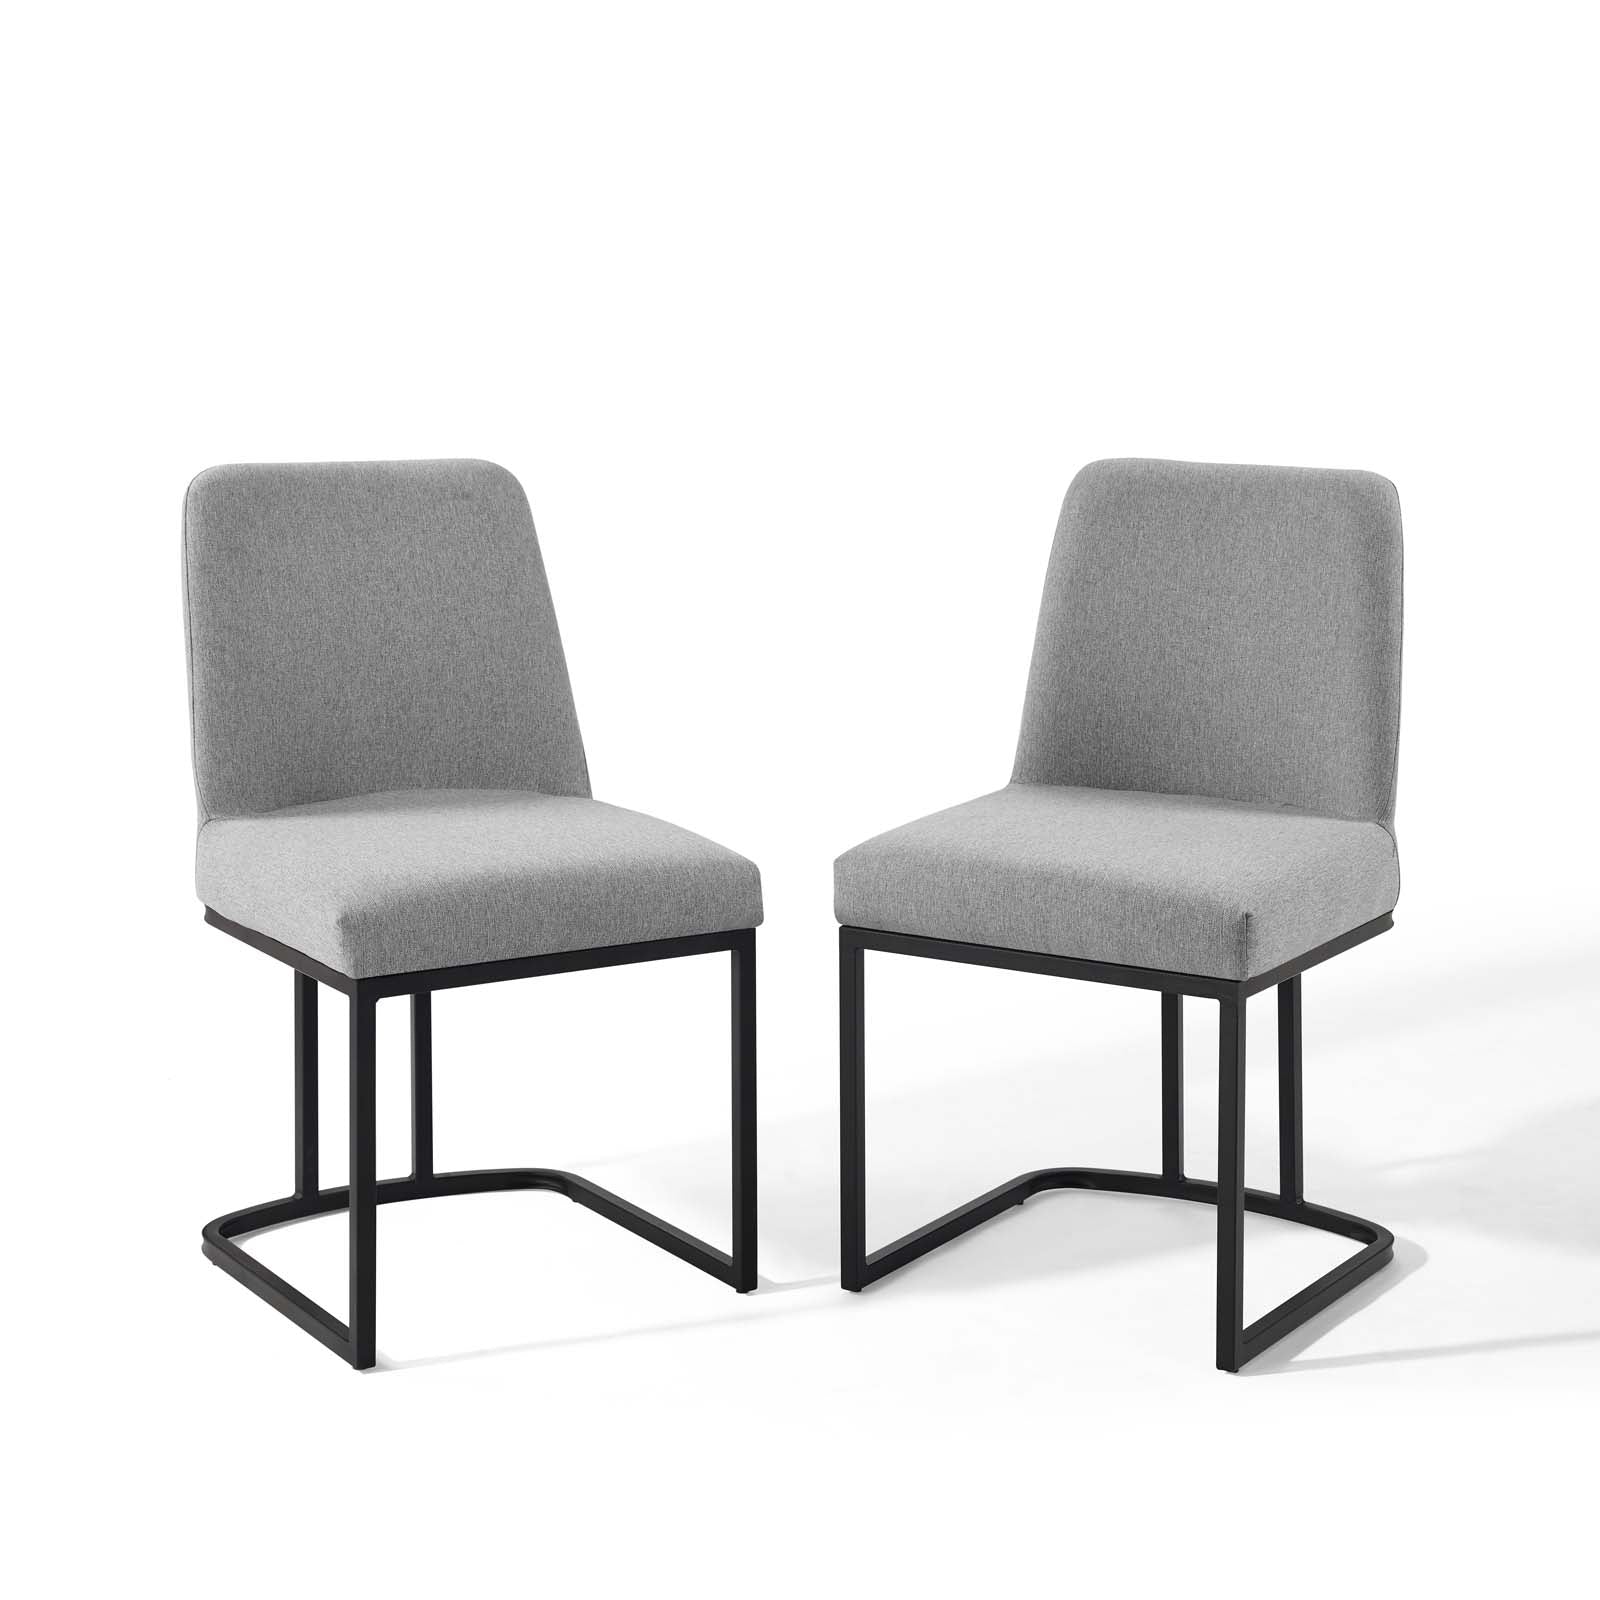 Amplify Sled Base Upholstered Fabric Dining Chairs - Set of 2 - East Shore Modern Home Furnishings